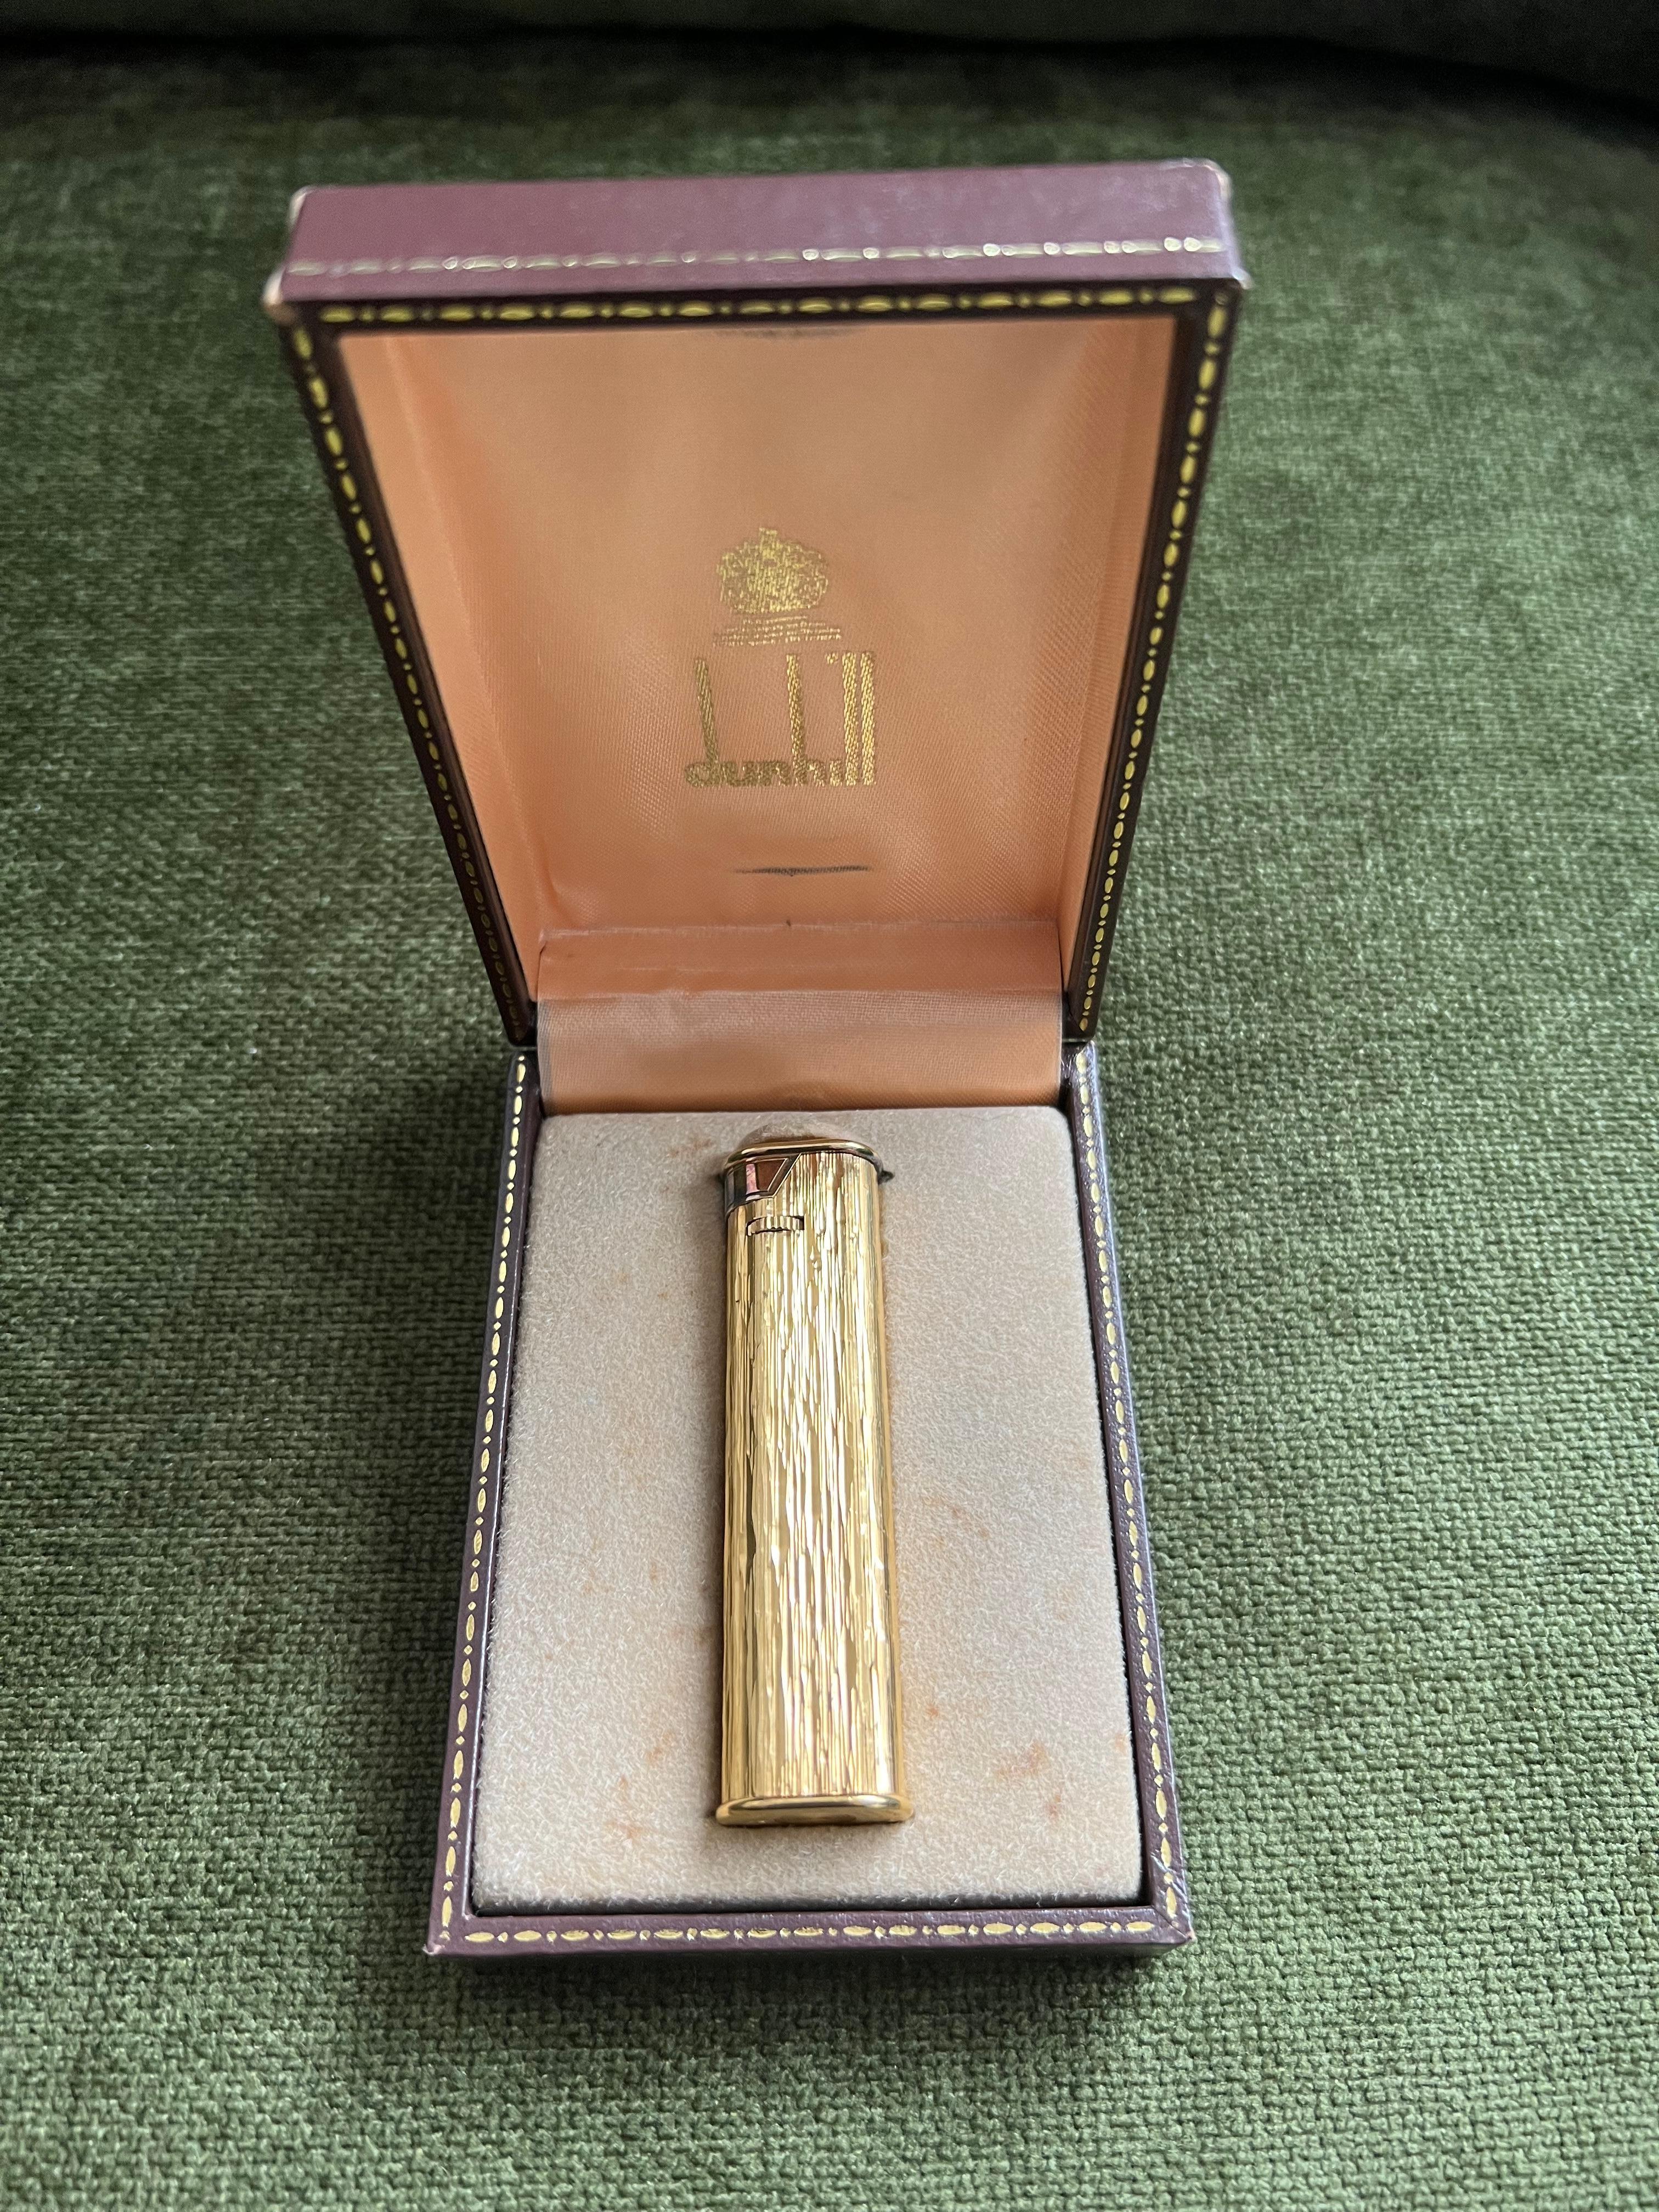 Dunhill Rare Vintage Gold plated.
Vintage Dunhill gold plated Evening lighter.
This lighter was made in 1960s to 1970s as an evening lighter, 
it has a long slim silhouette. 
Perfect fit for your inside pocket in your evening jacket or tuxedo, this